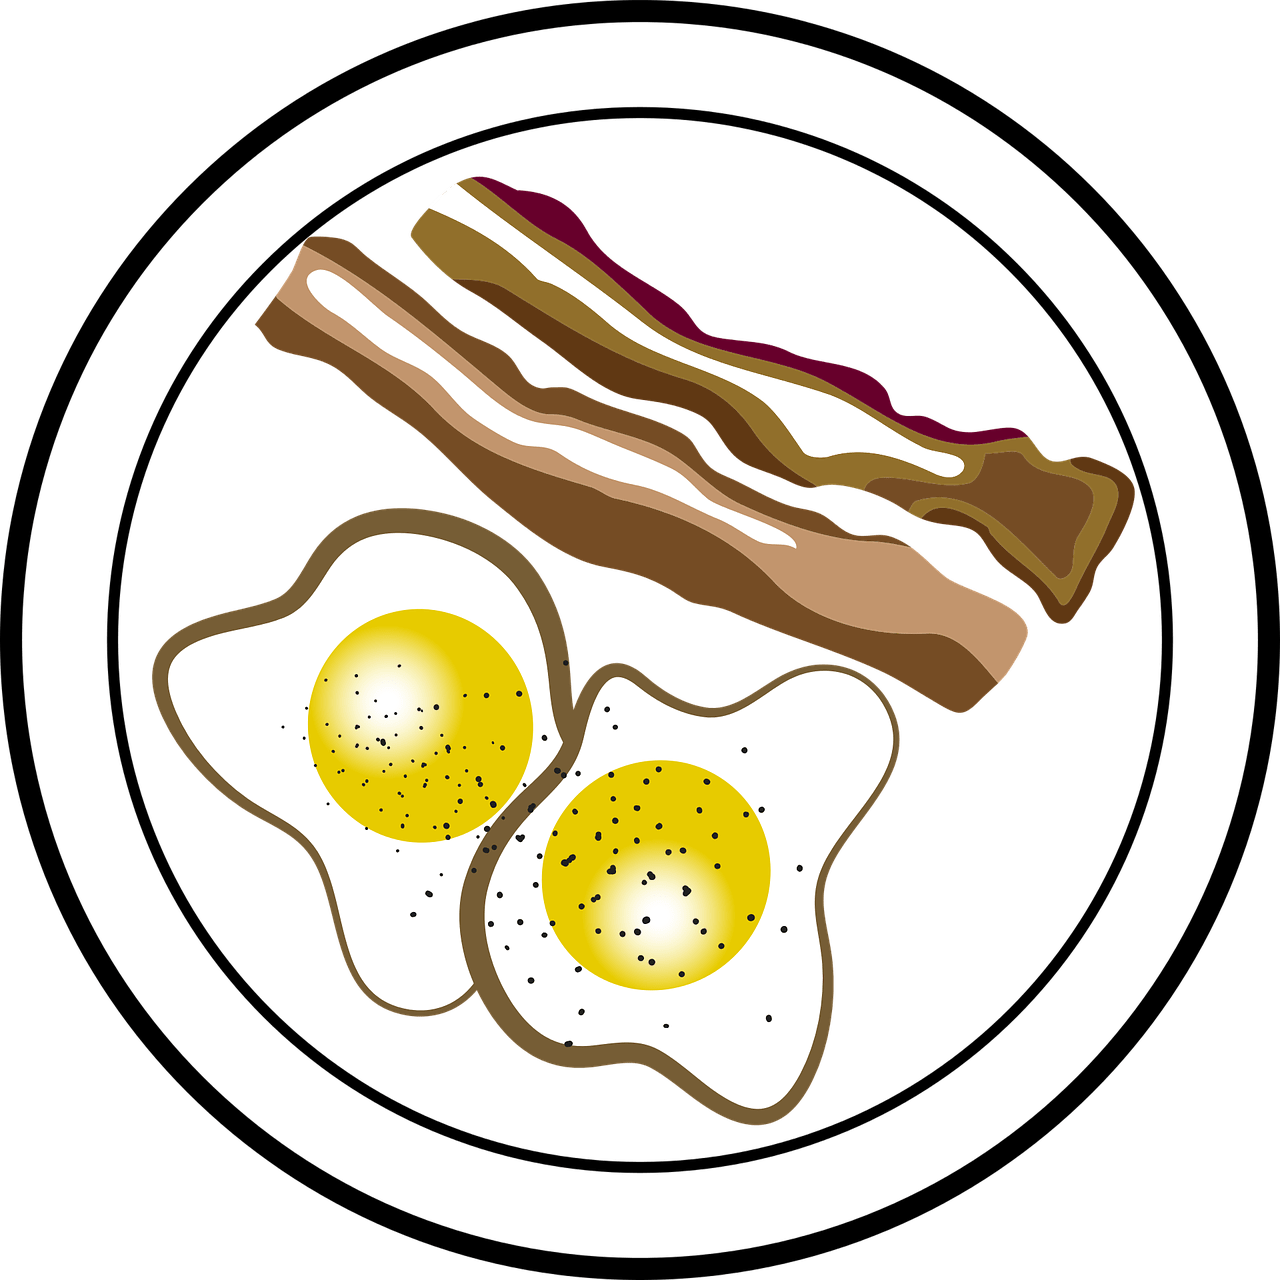 Share - Eggs And Bacon Graphic (1280x1280)